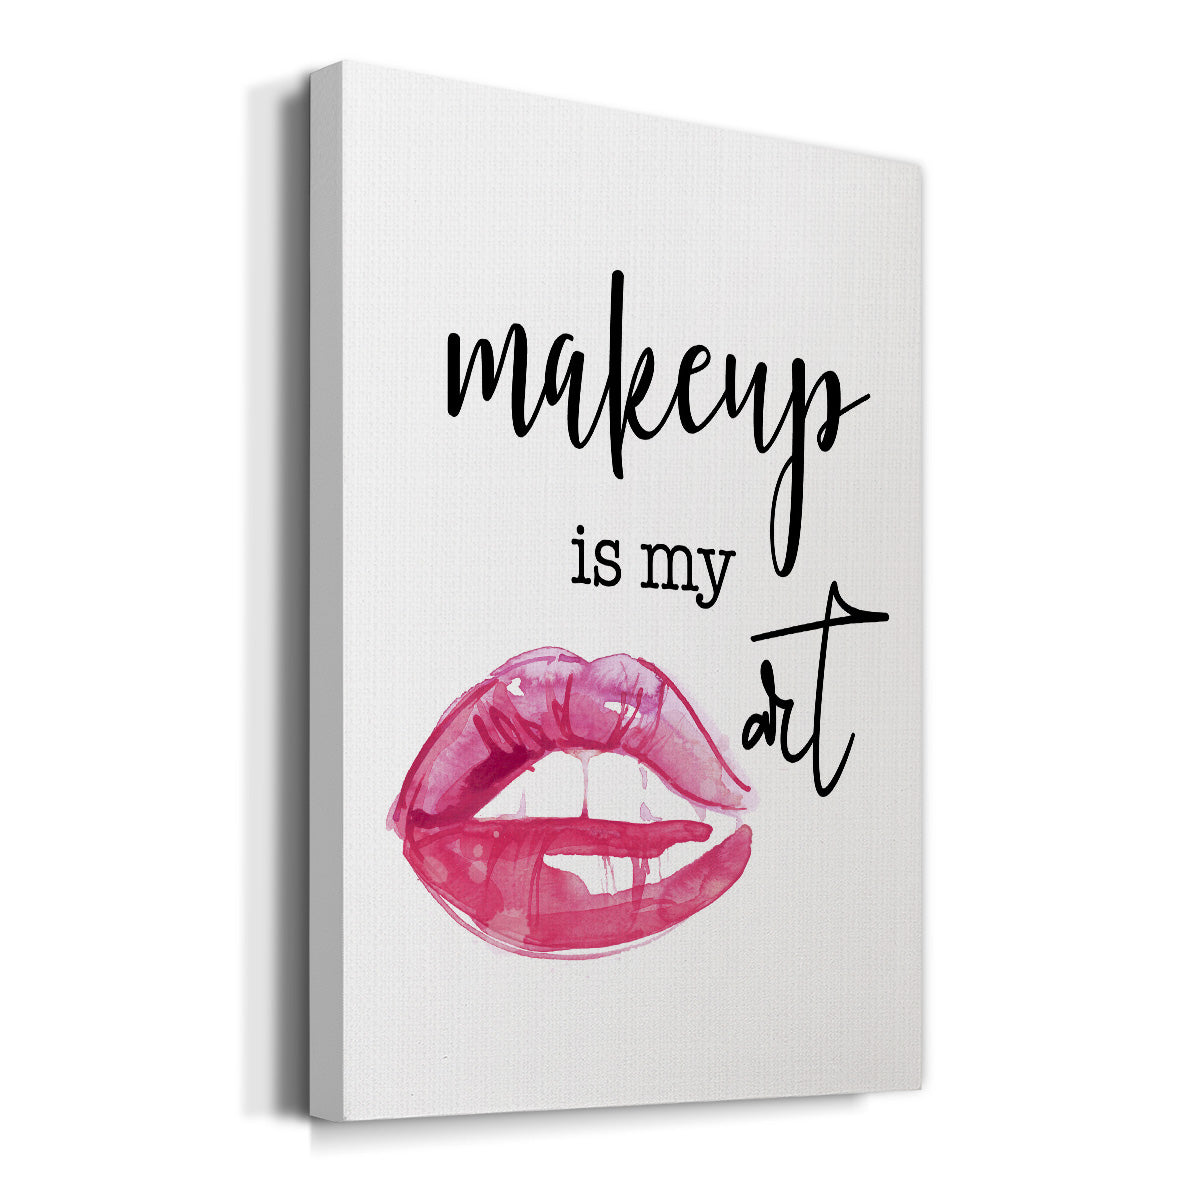 Makeup is My Art Premium Gallery Wrapped Canvas - Ready to Hang